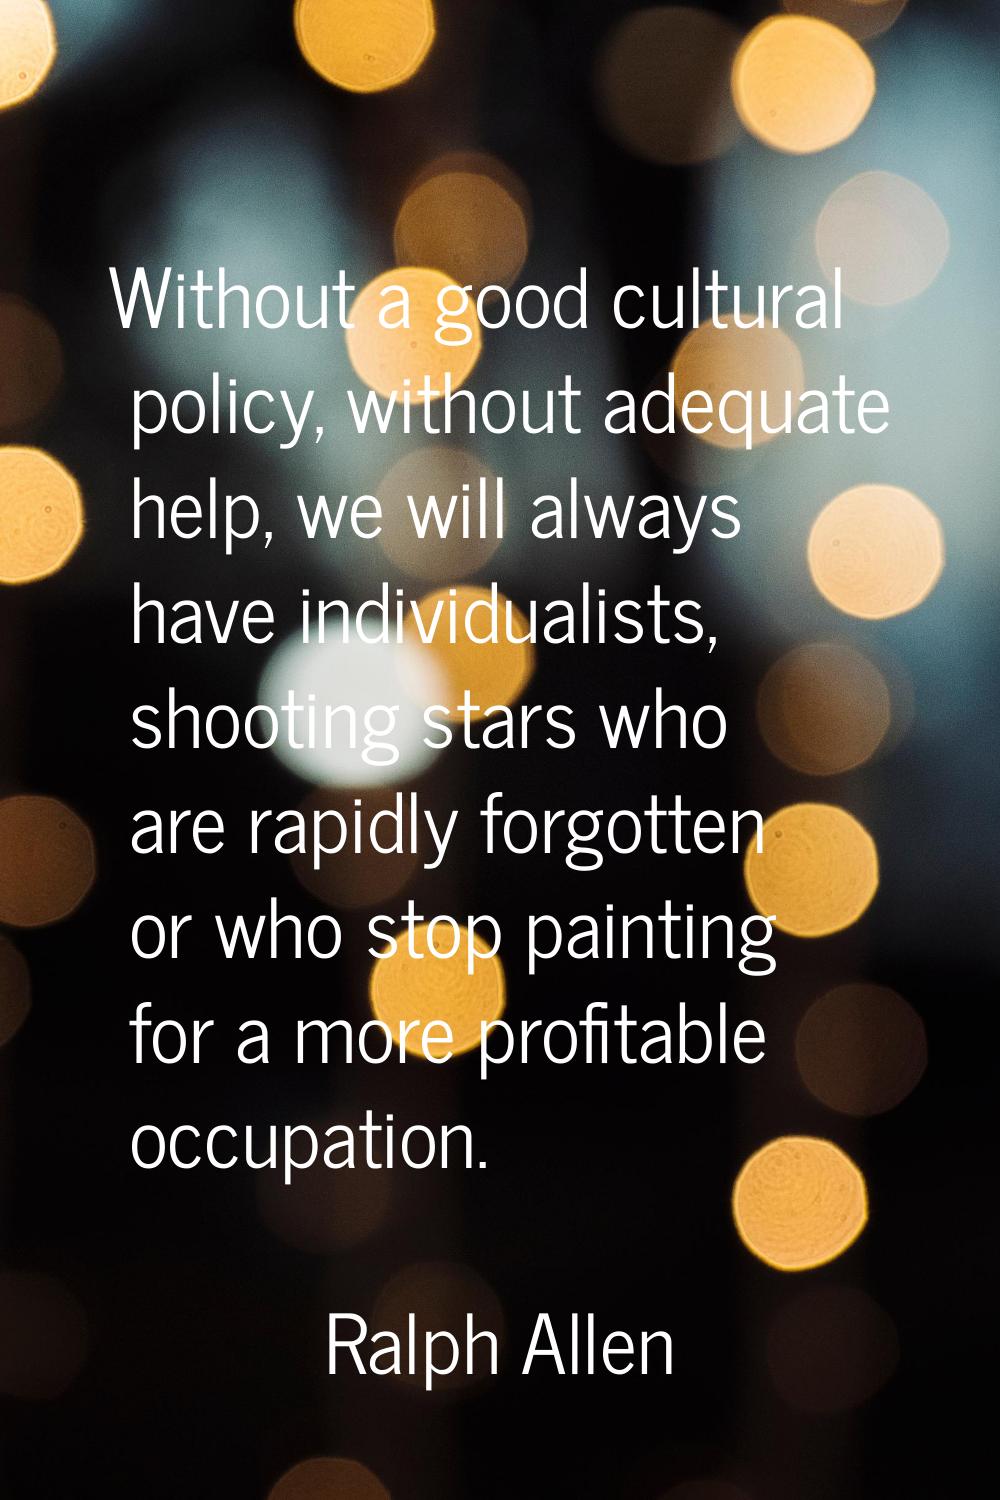 Without a good cultural policy, without adequate help, we will always have individualists, shooting